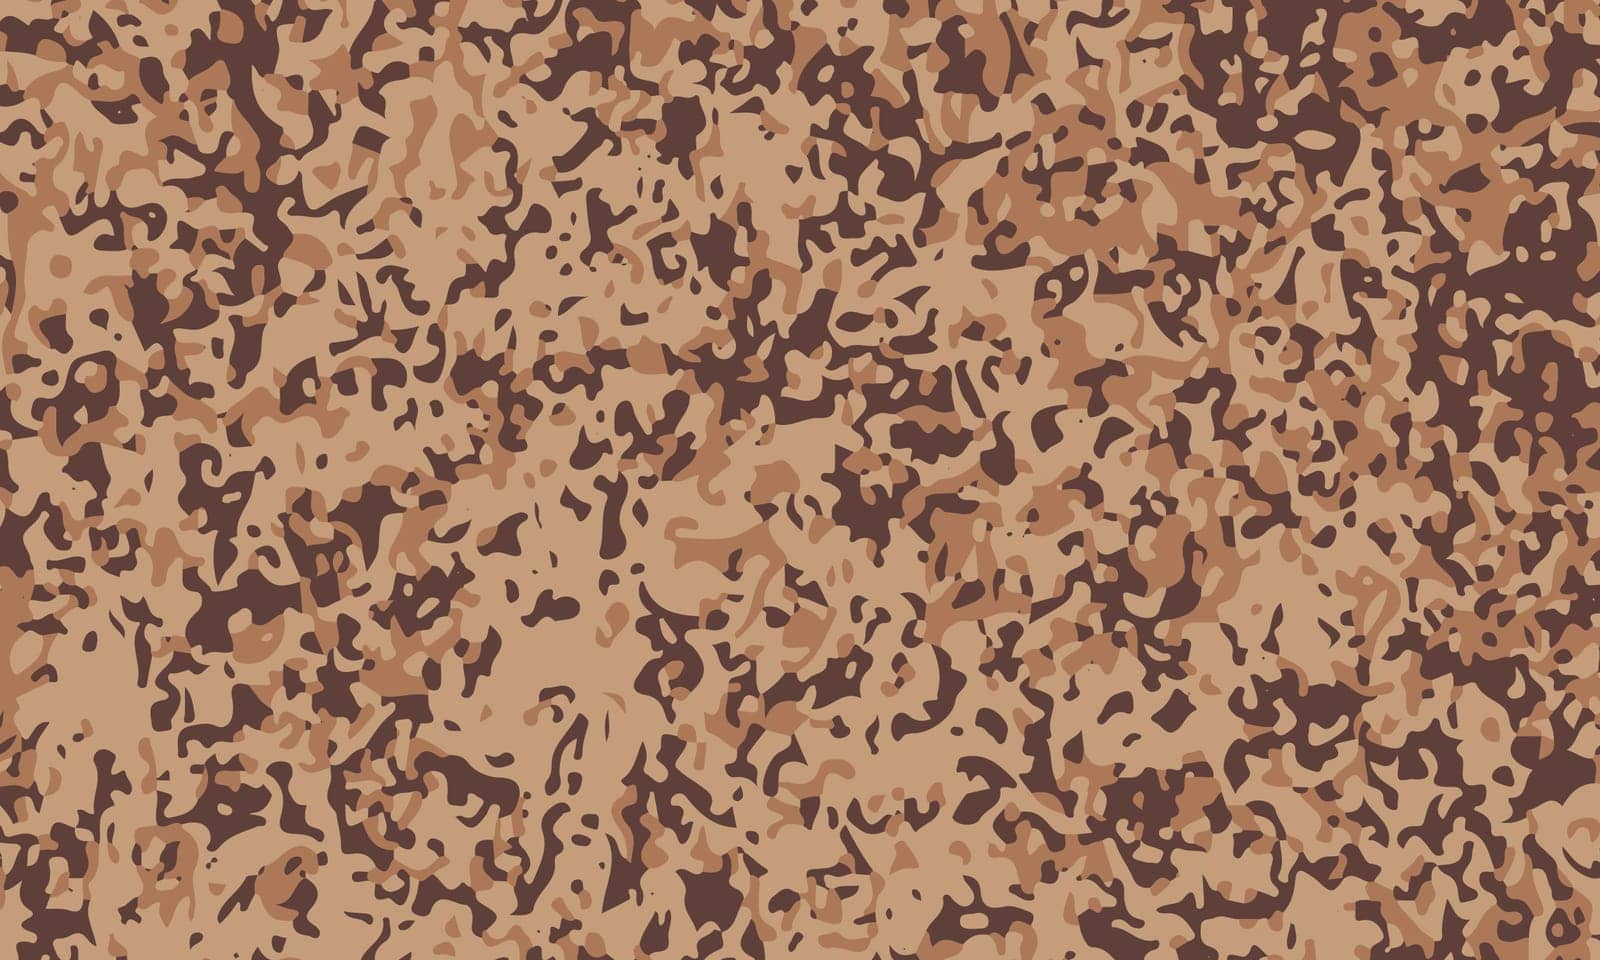 Texture military camouflage army. Camouflage military background. Vector illustration by Aozora